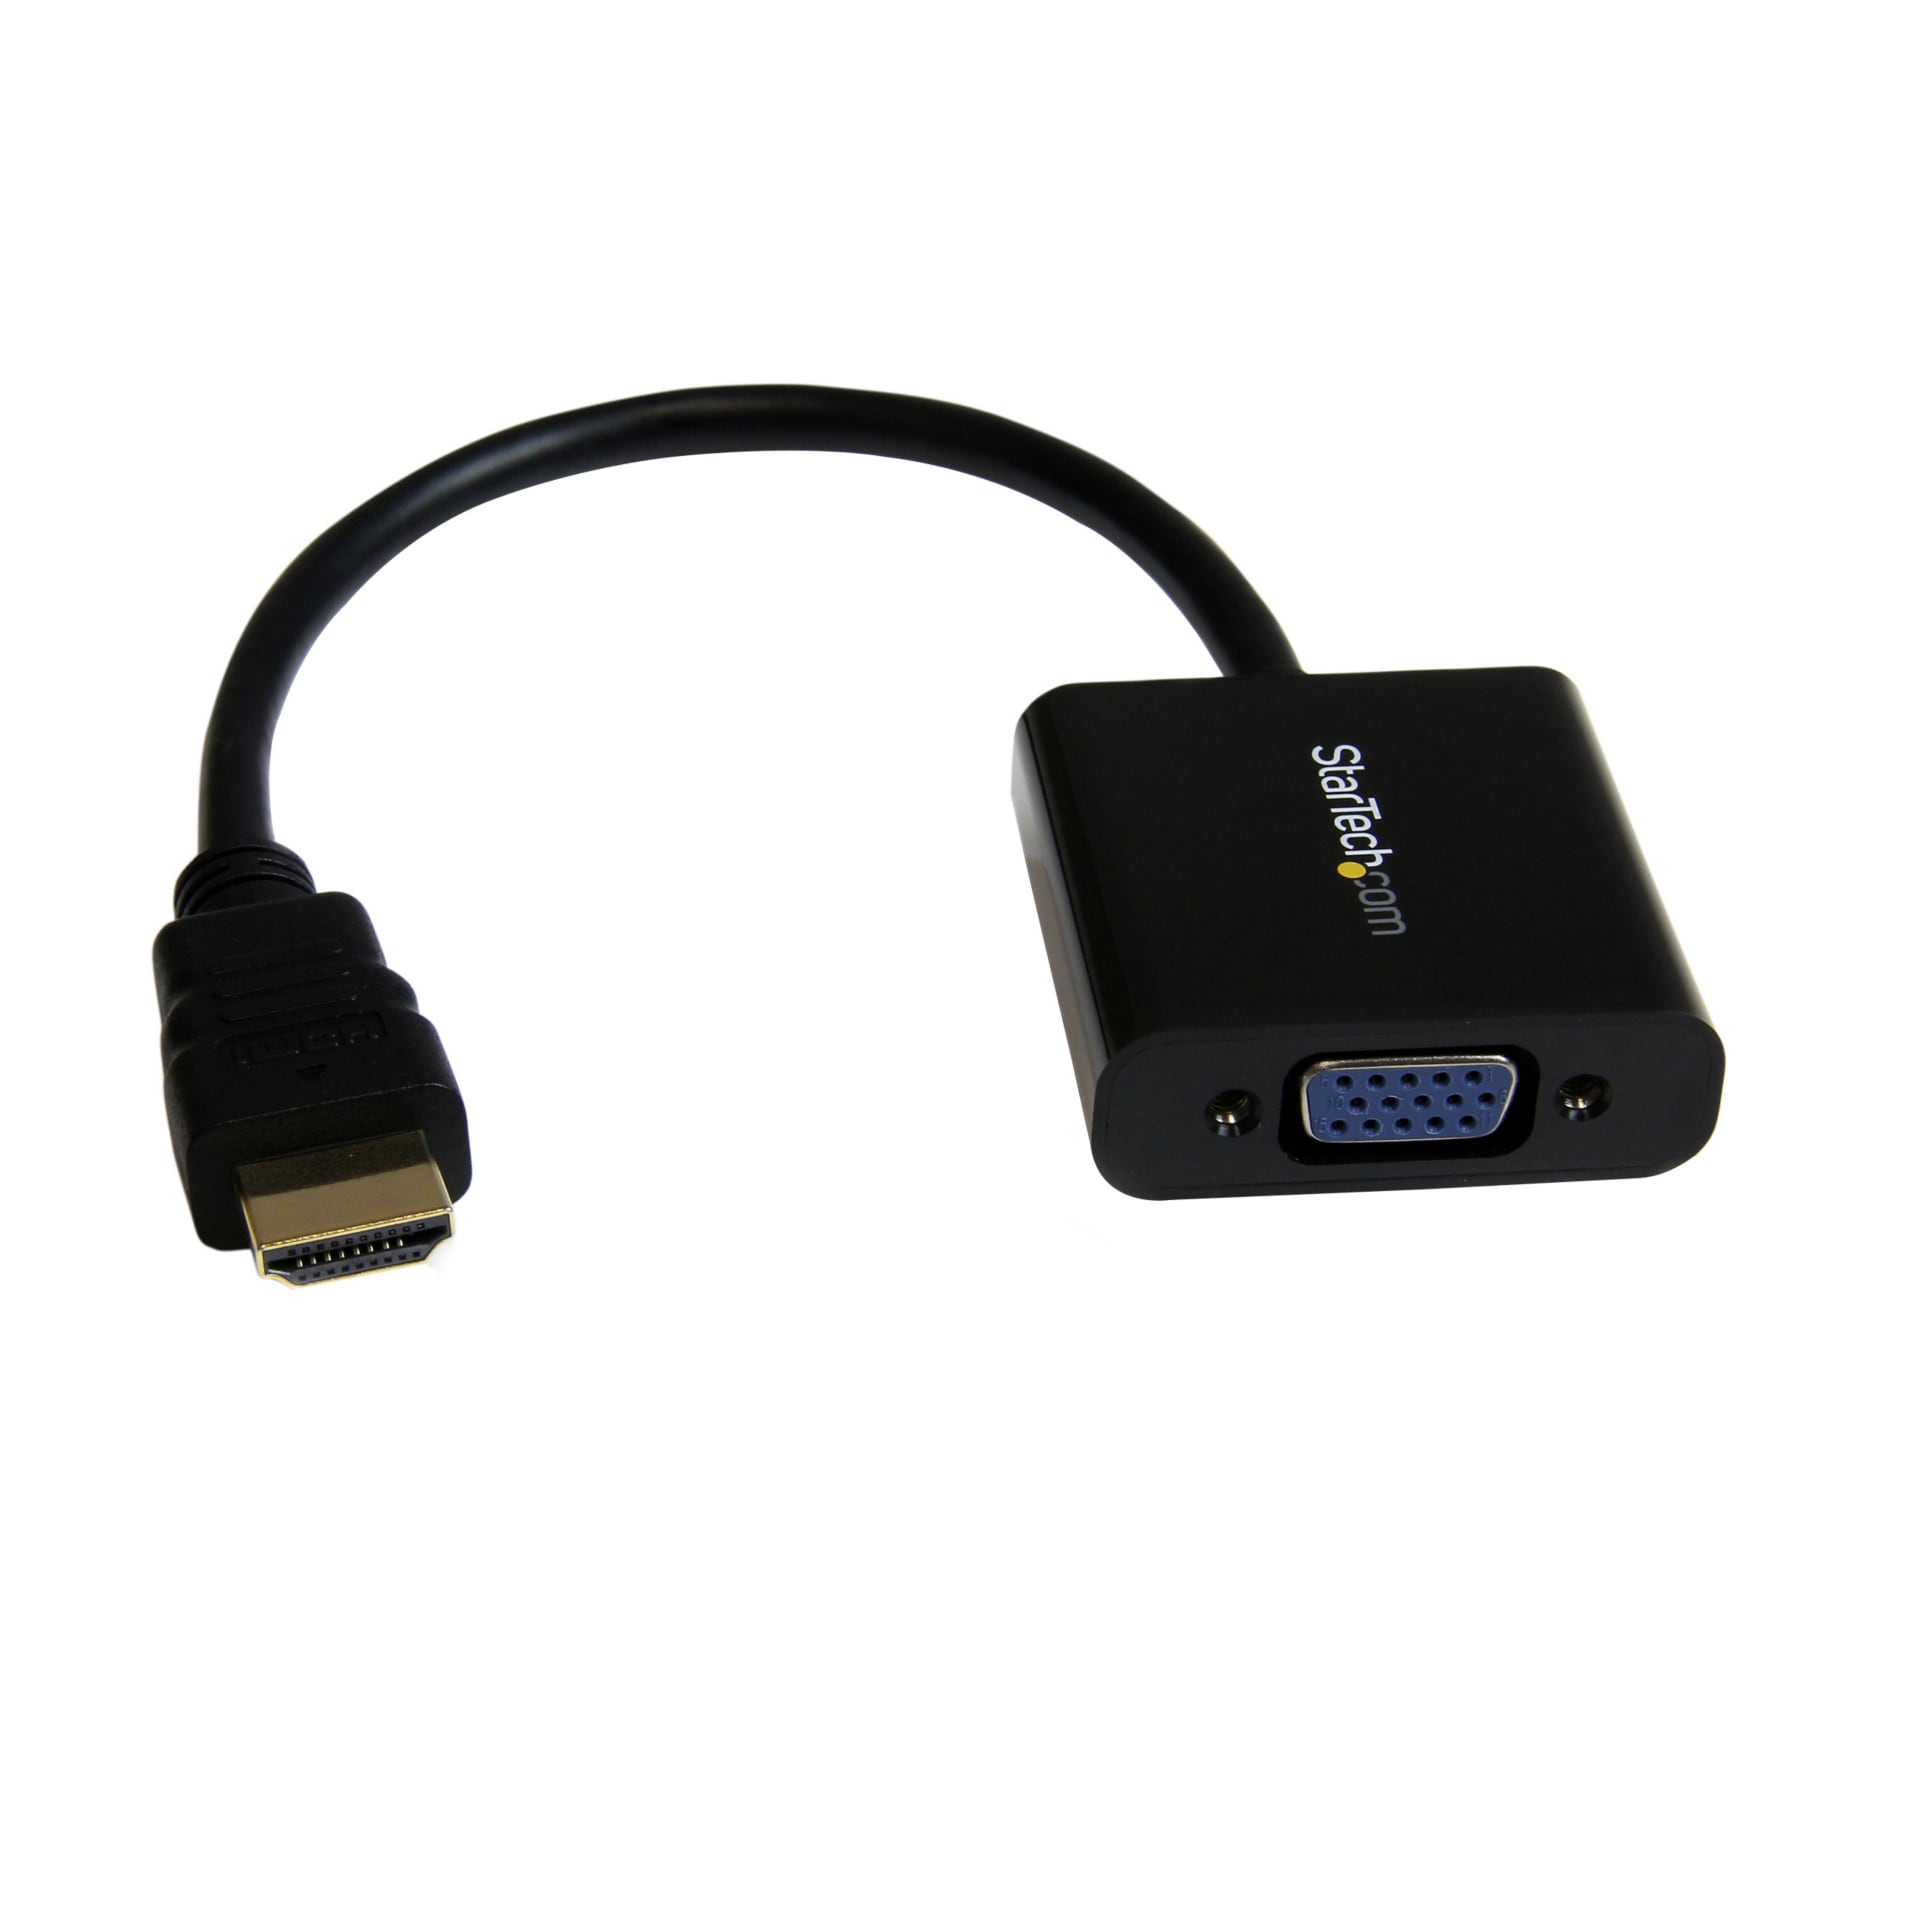 StarTech.com HDMI to VGA Adapter - Active Converter Cable 1080p - HD2VGAE2 - Cables & - CDW.com